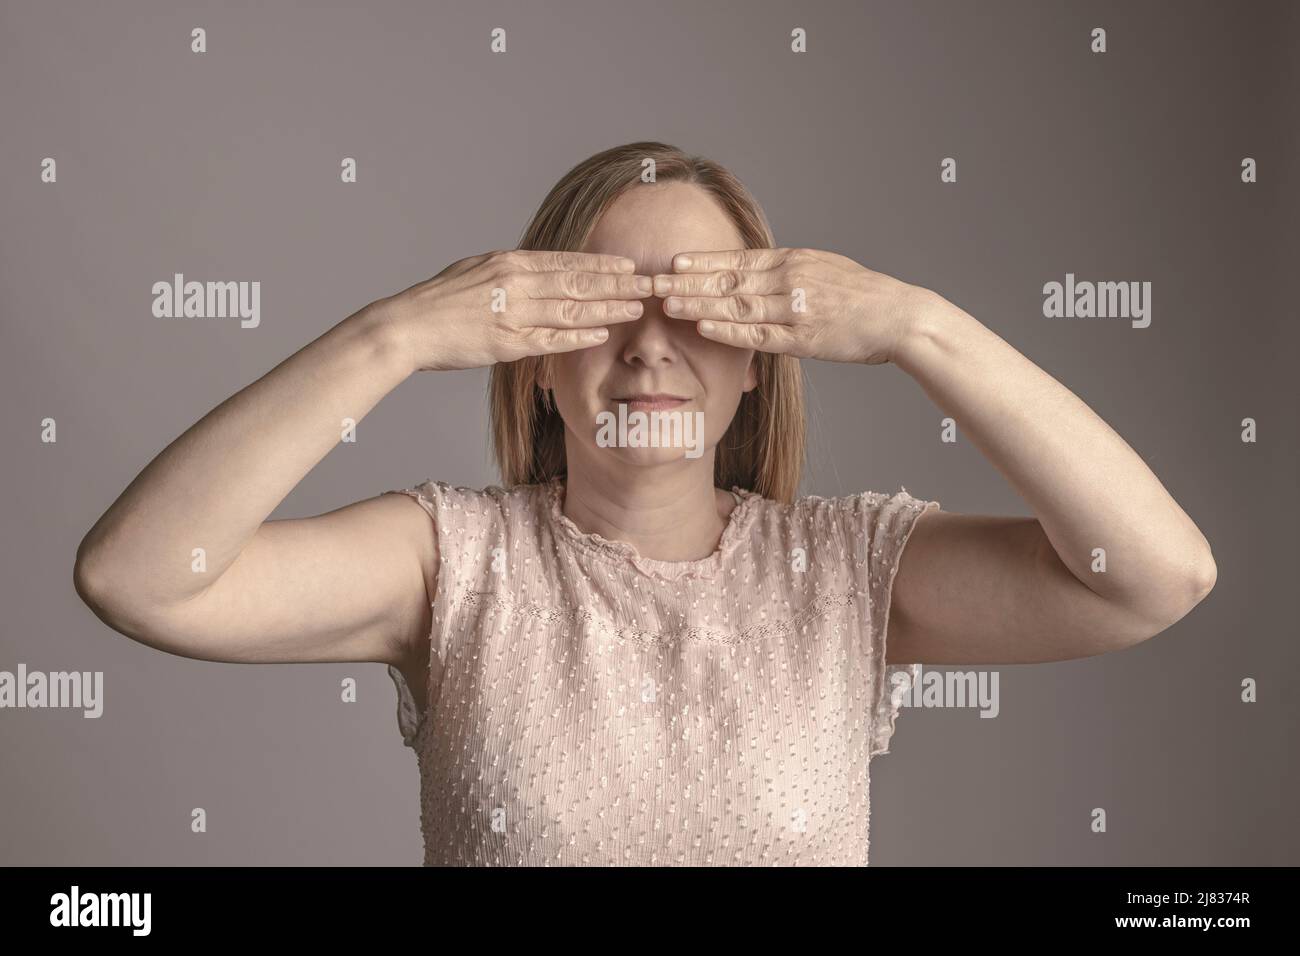 portrait of woman covering her eyes with her hands Stock Photo